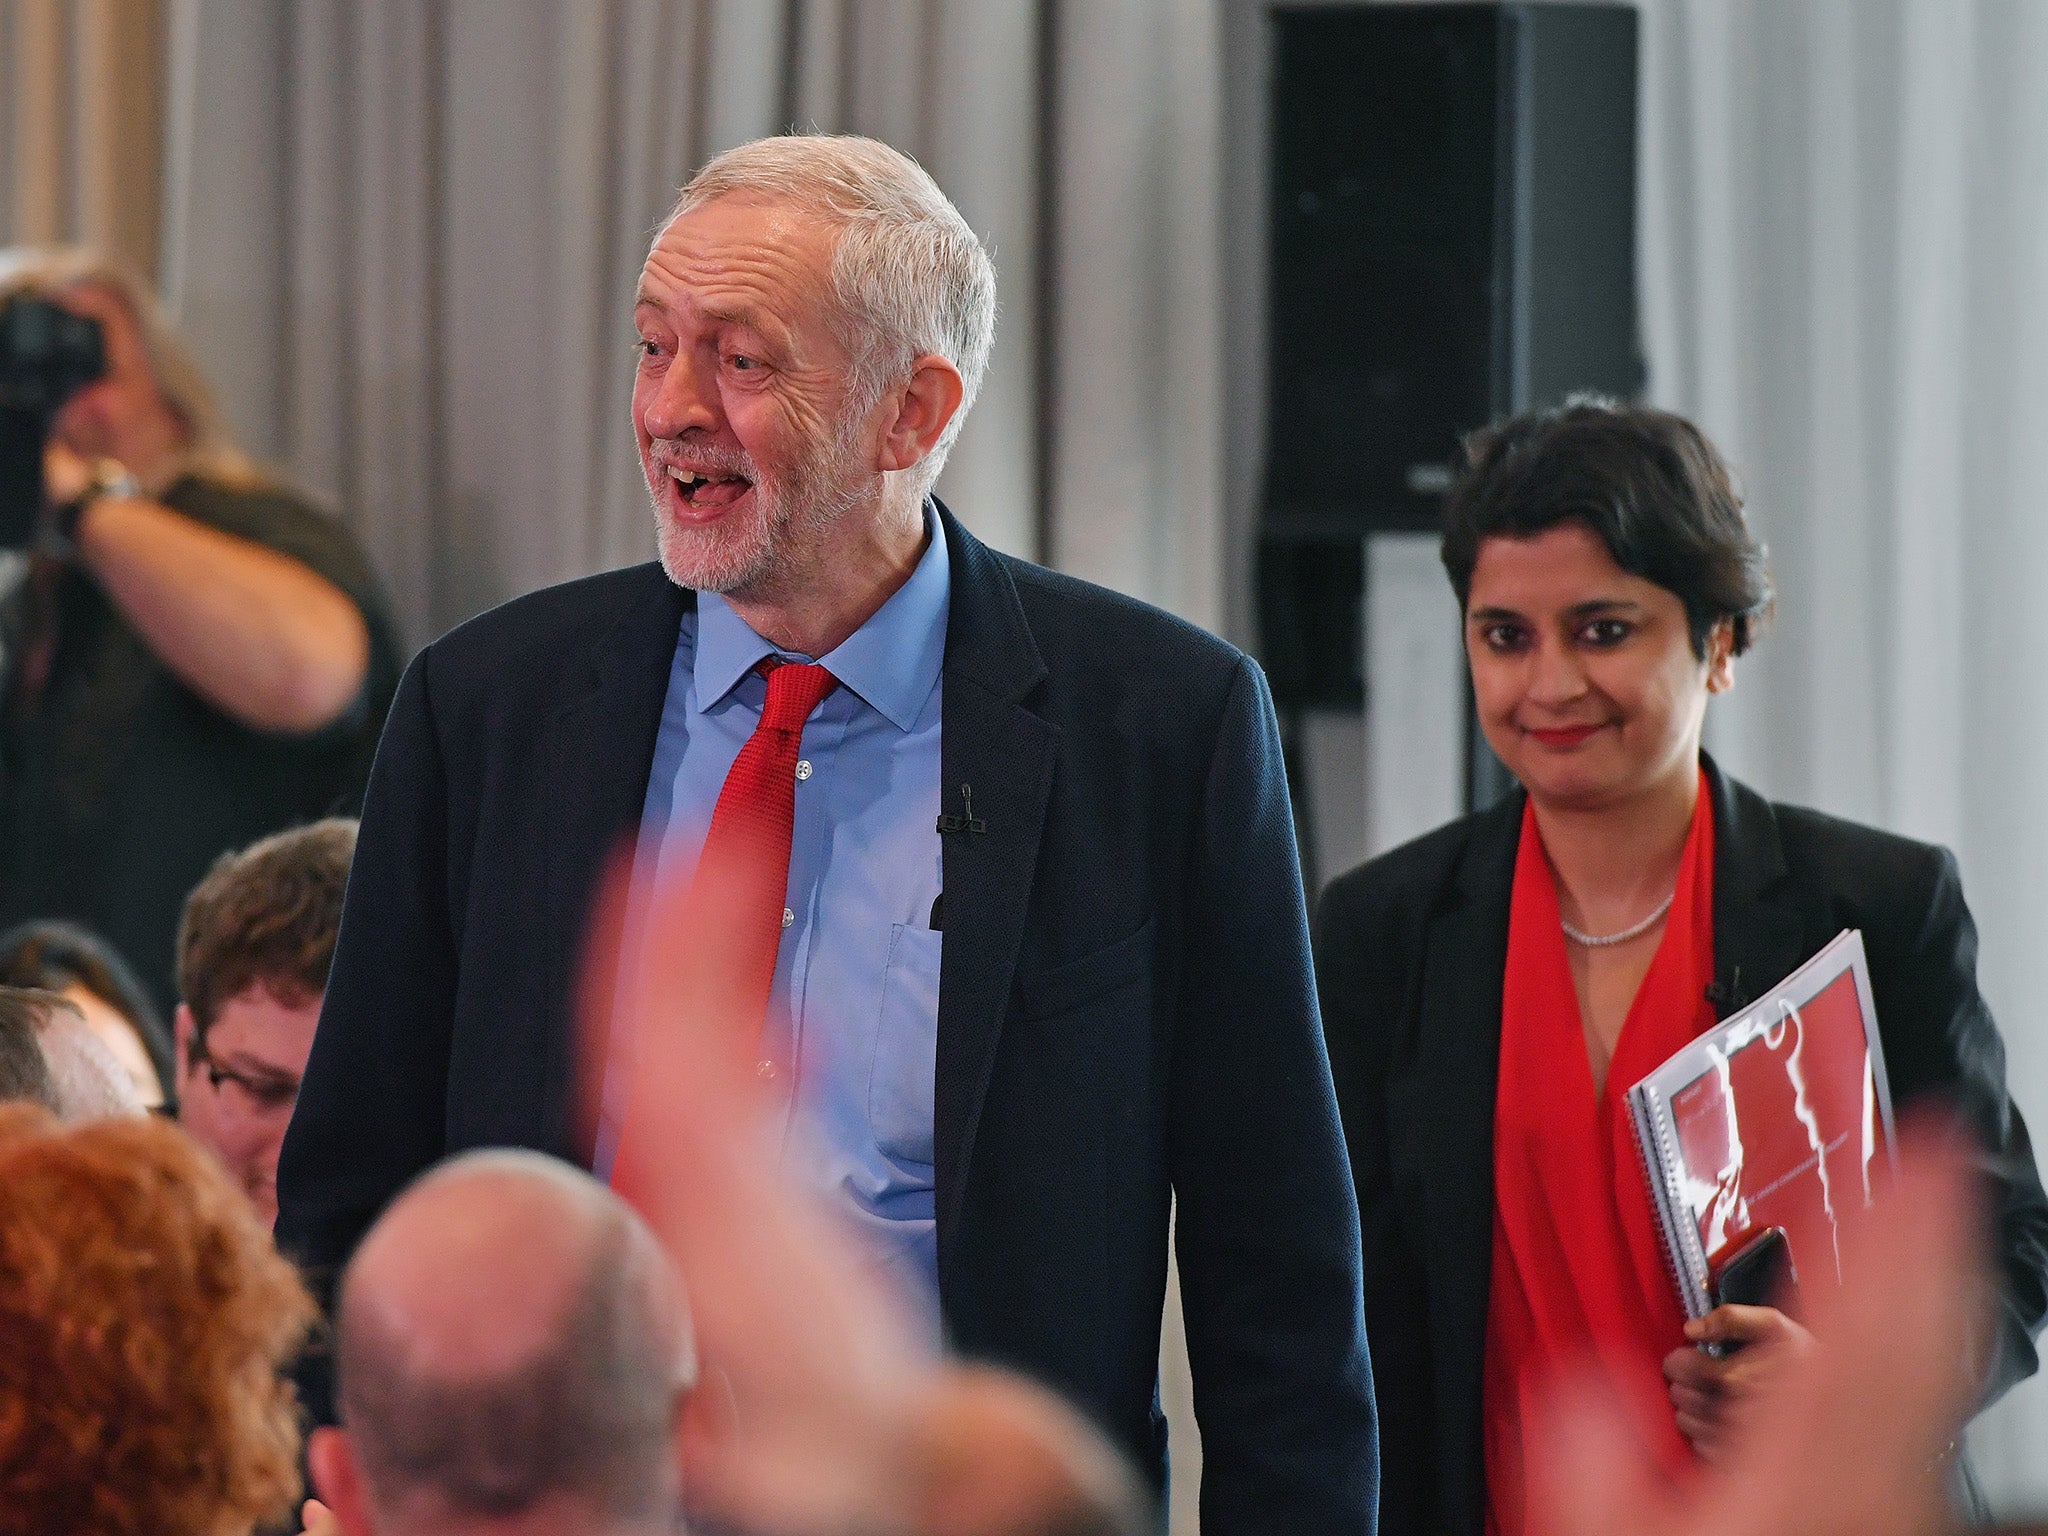 Jeremy Corbyn and Labour peer Shami Chakrabarti were both outspoken advocates of civil liberties in their earlier careers – but will they oppose the government now?